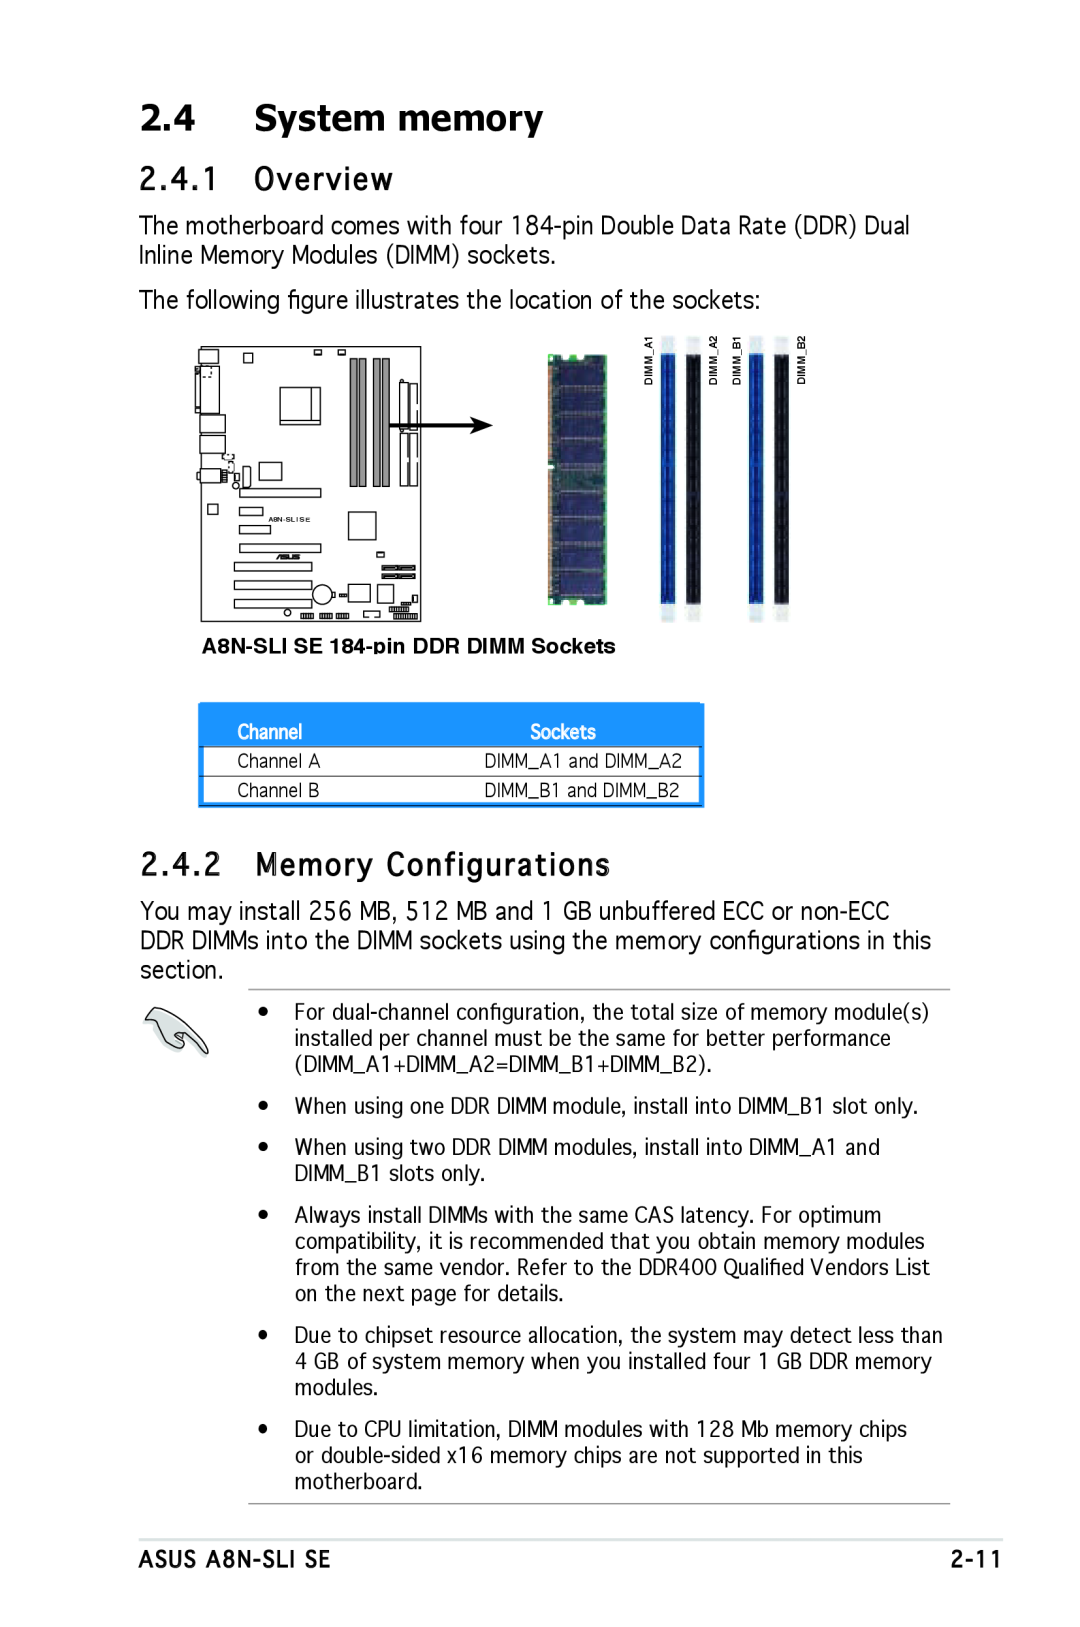 Asus A8N-SLI SE manual System memory, Overview, Memory Configurations 